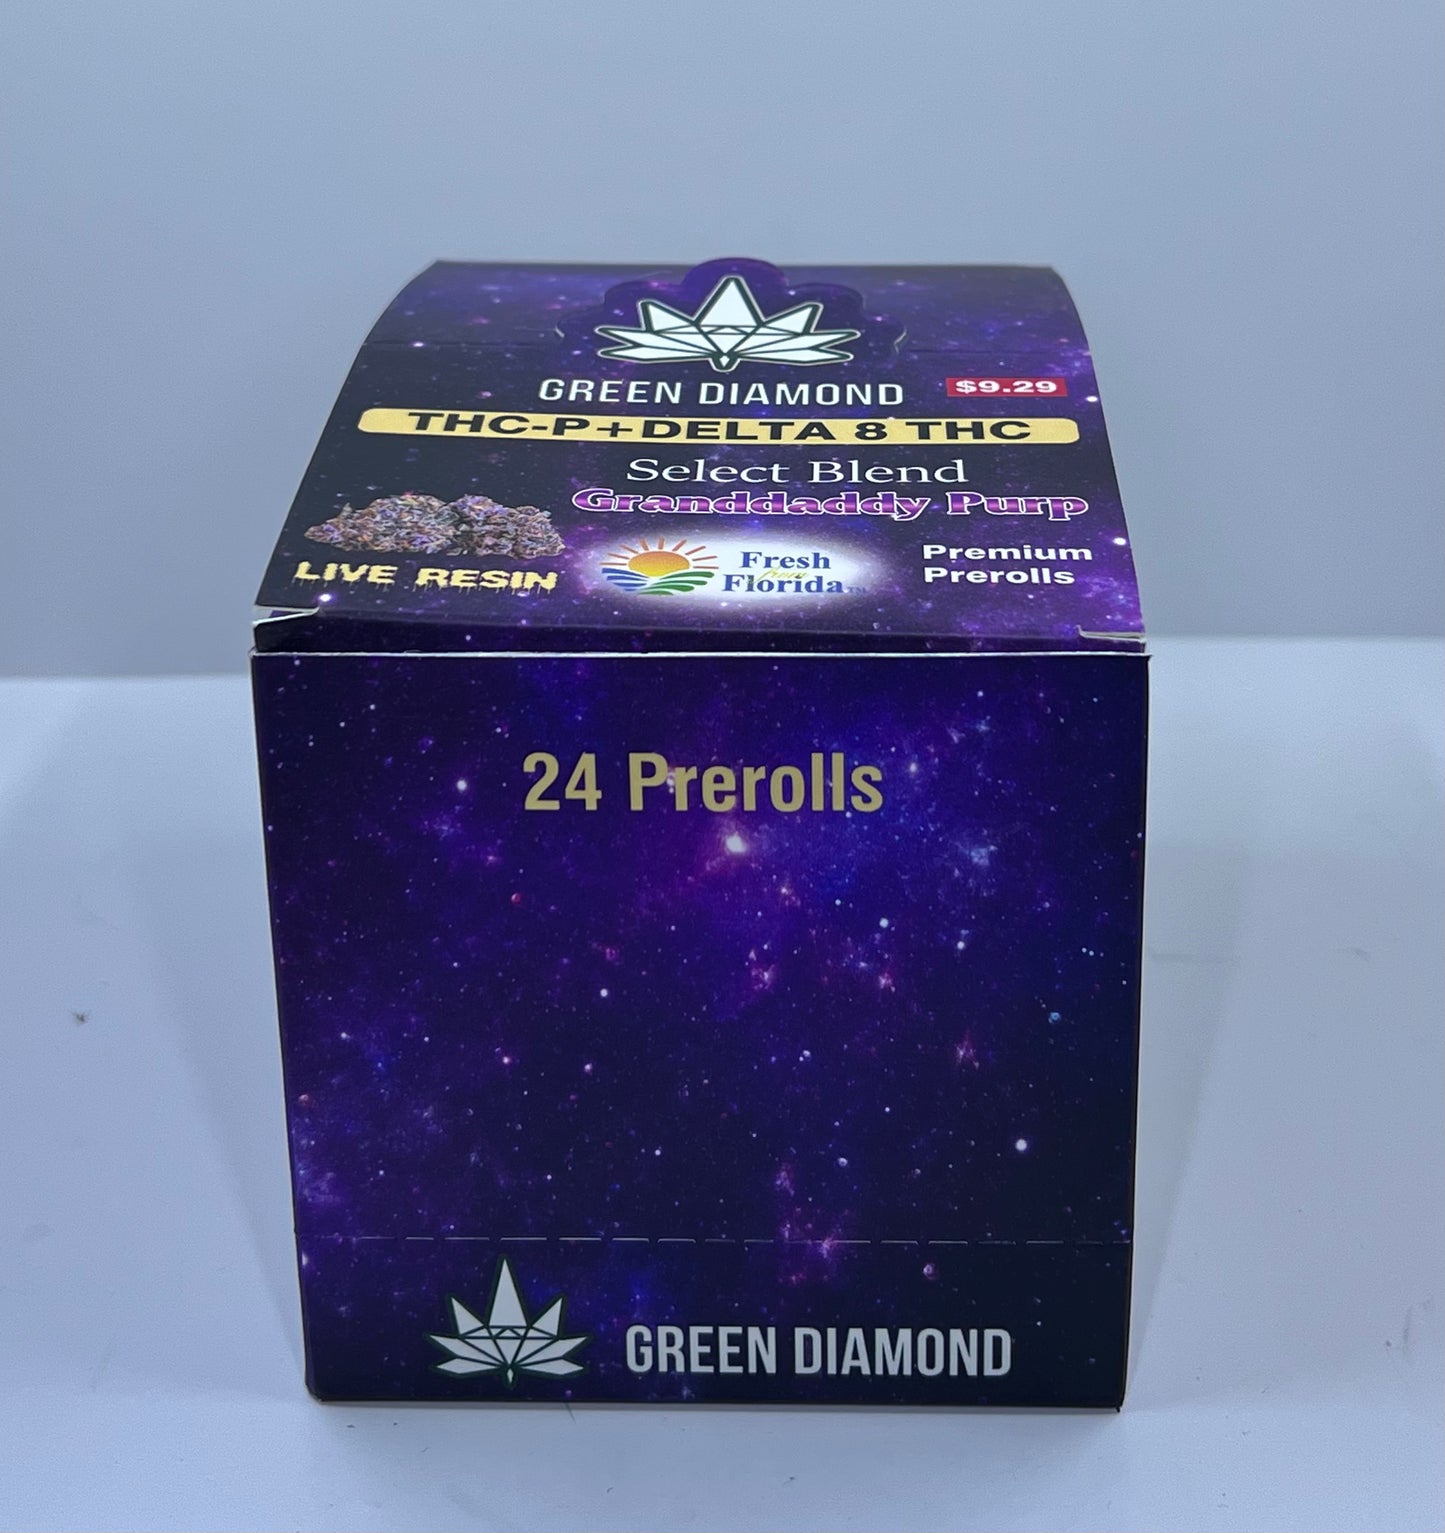 Green Diamond Delta 8 THC + THC-P Granddaddy Purp Pre-Roll yoga smokes yoga studio, delivery, delivery near me, yoga smokes smoke shop, find smoke shop, head shop near me, yoga studio, headshop, head shop, local smoke shop, psl, psl smoke shop, smoke shop, smokeshop, yoga, yoga studio, dispensary, local dispensary, smokeshop near me, port saint lucie, florida, port st lucie, lounge, life, highlife, love, stoned, highsociety. Yoga Smokes